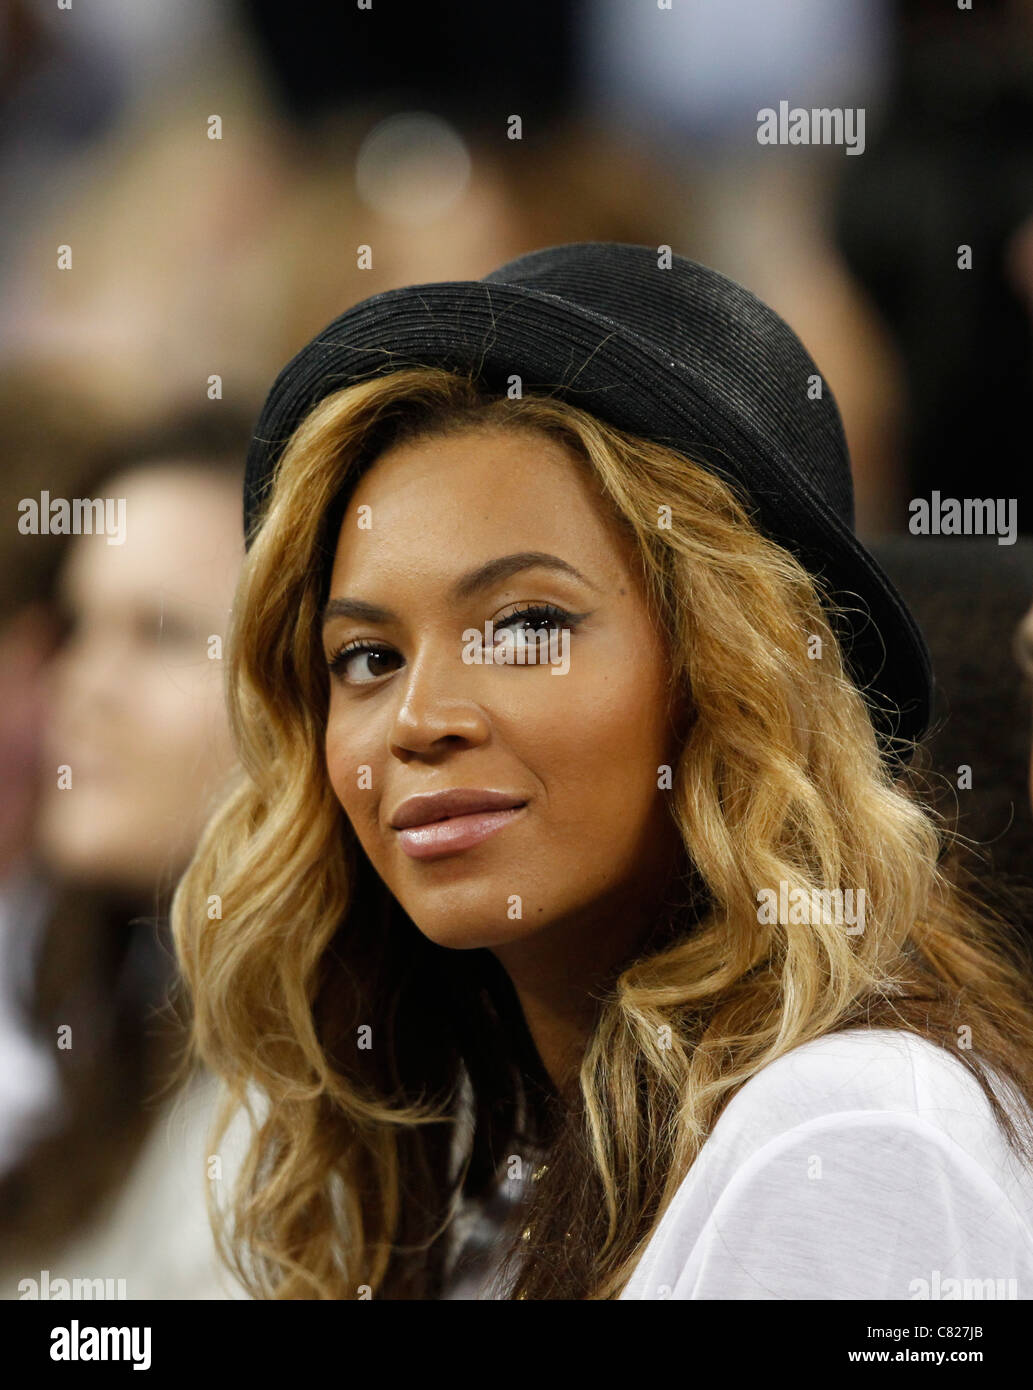 Pop star Beyonce as a spectator  at the U.S. Open 2011, Stock Photo